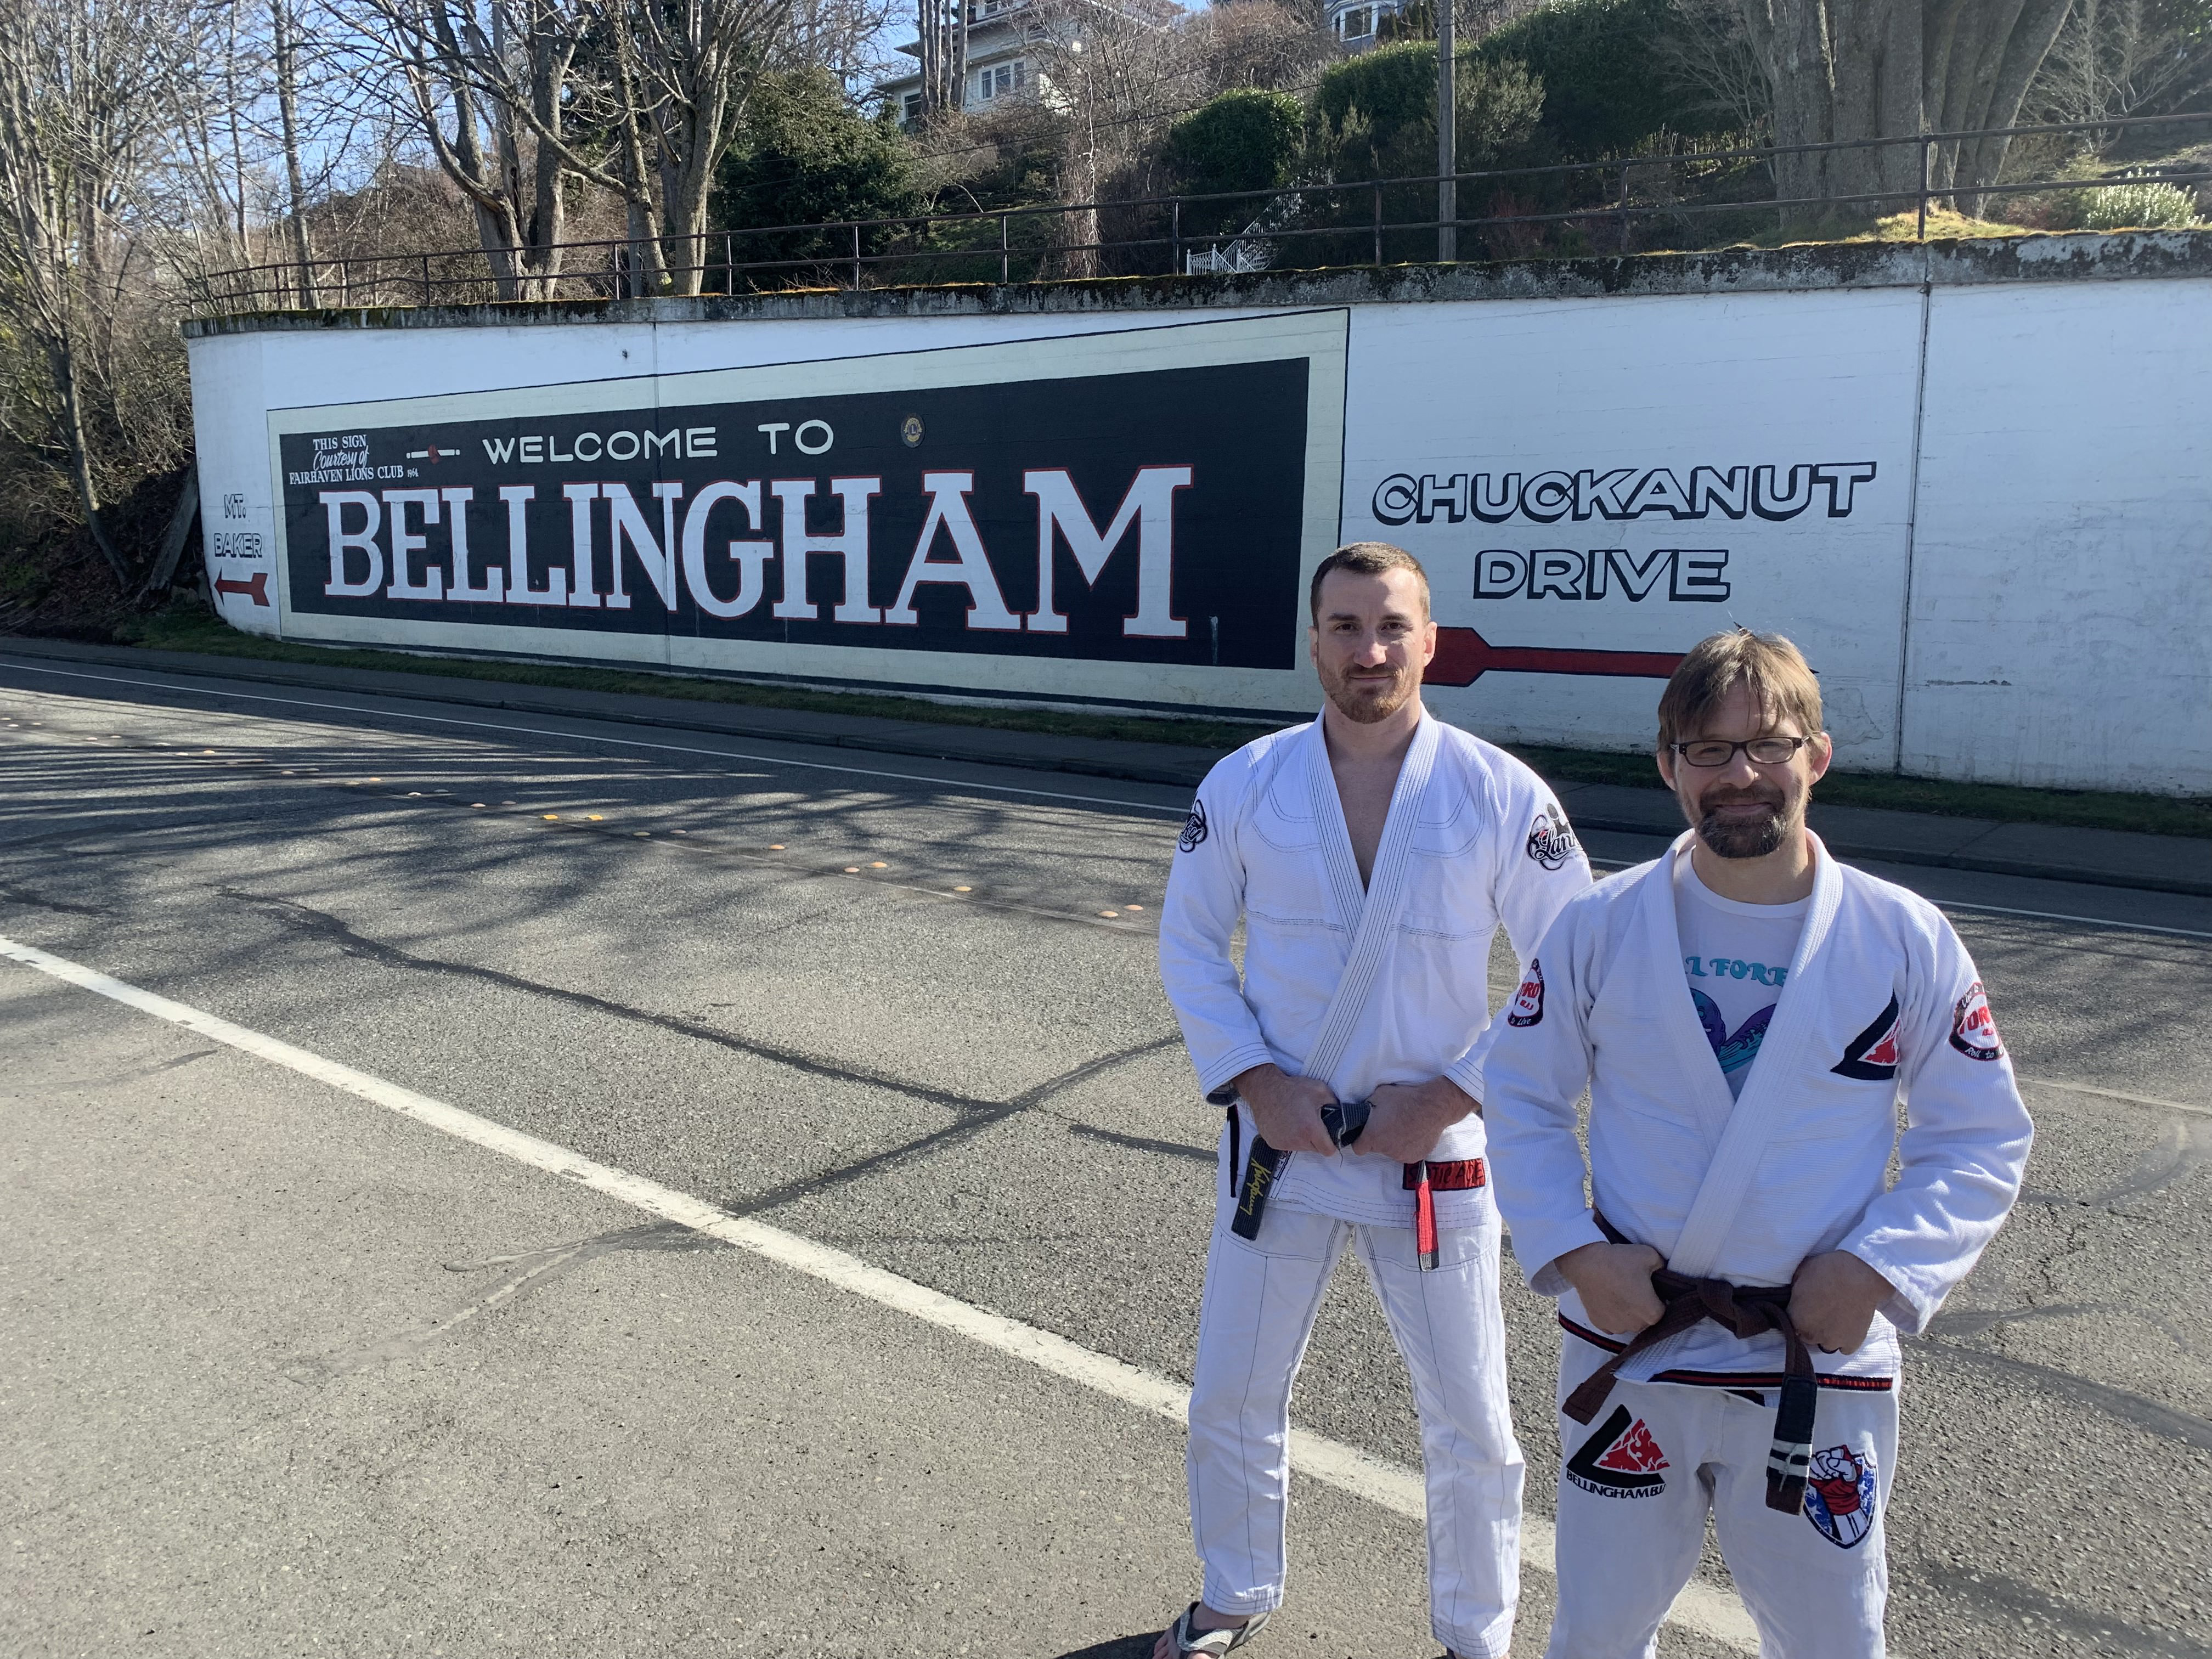 Bellingham BJJ is moving to a new location!